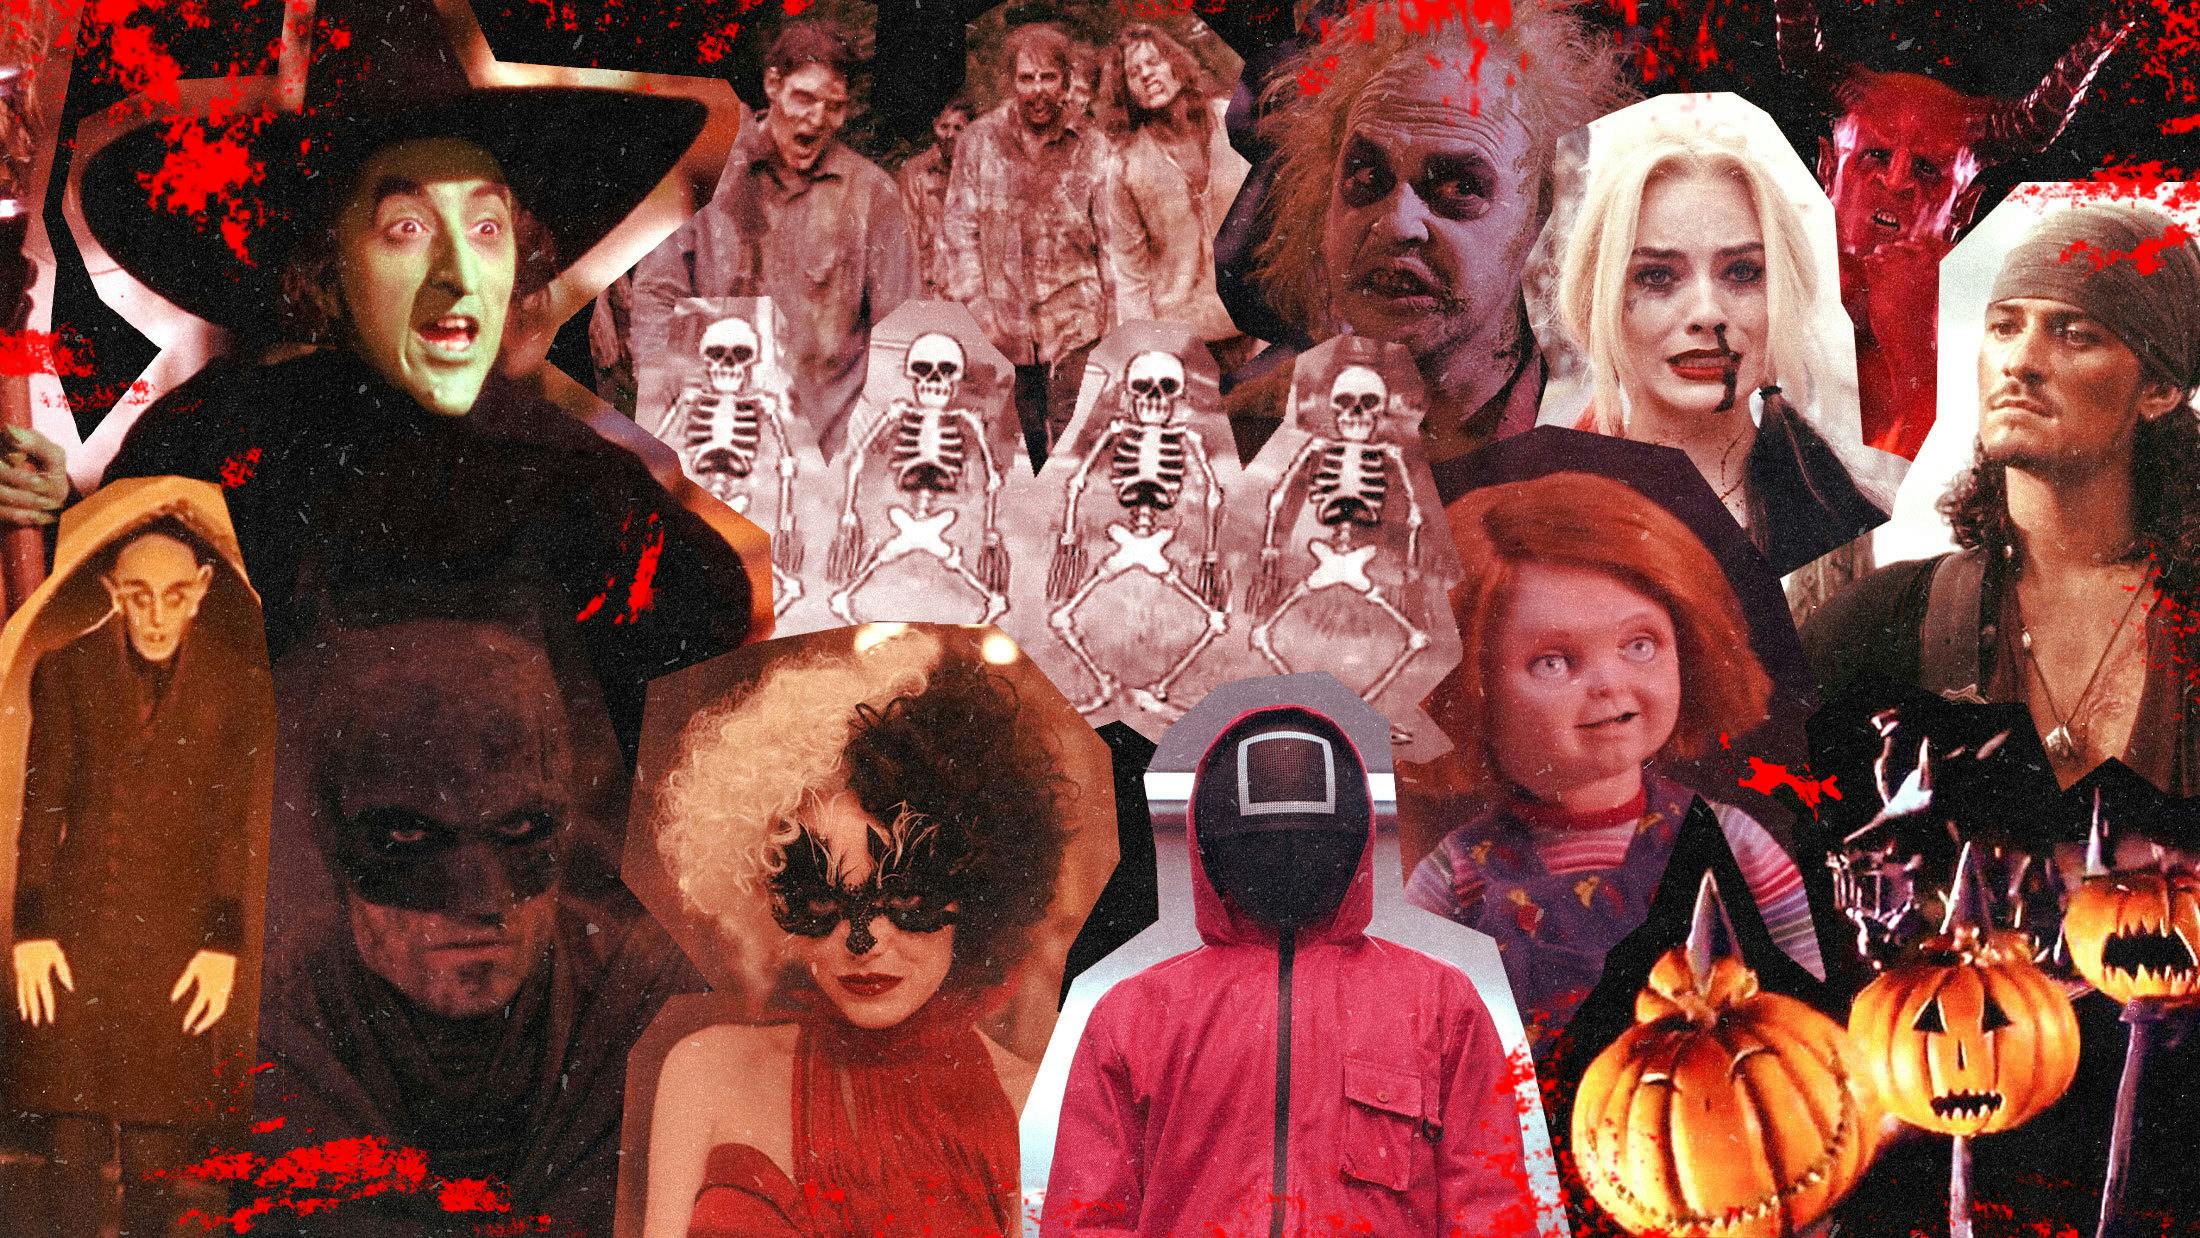 We used science to determine the all-time greatest Halloween costume